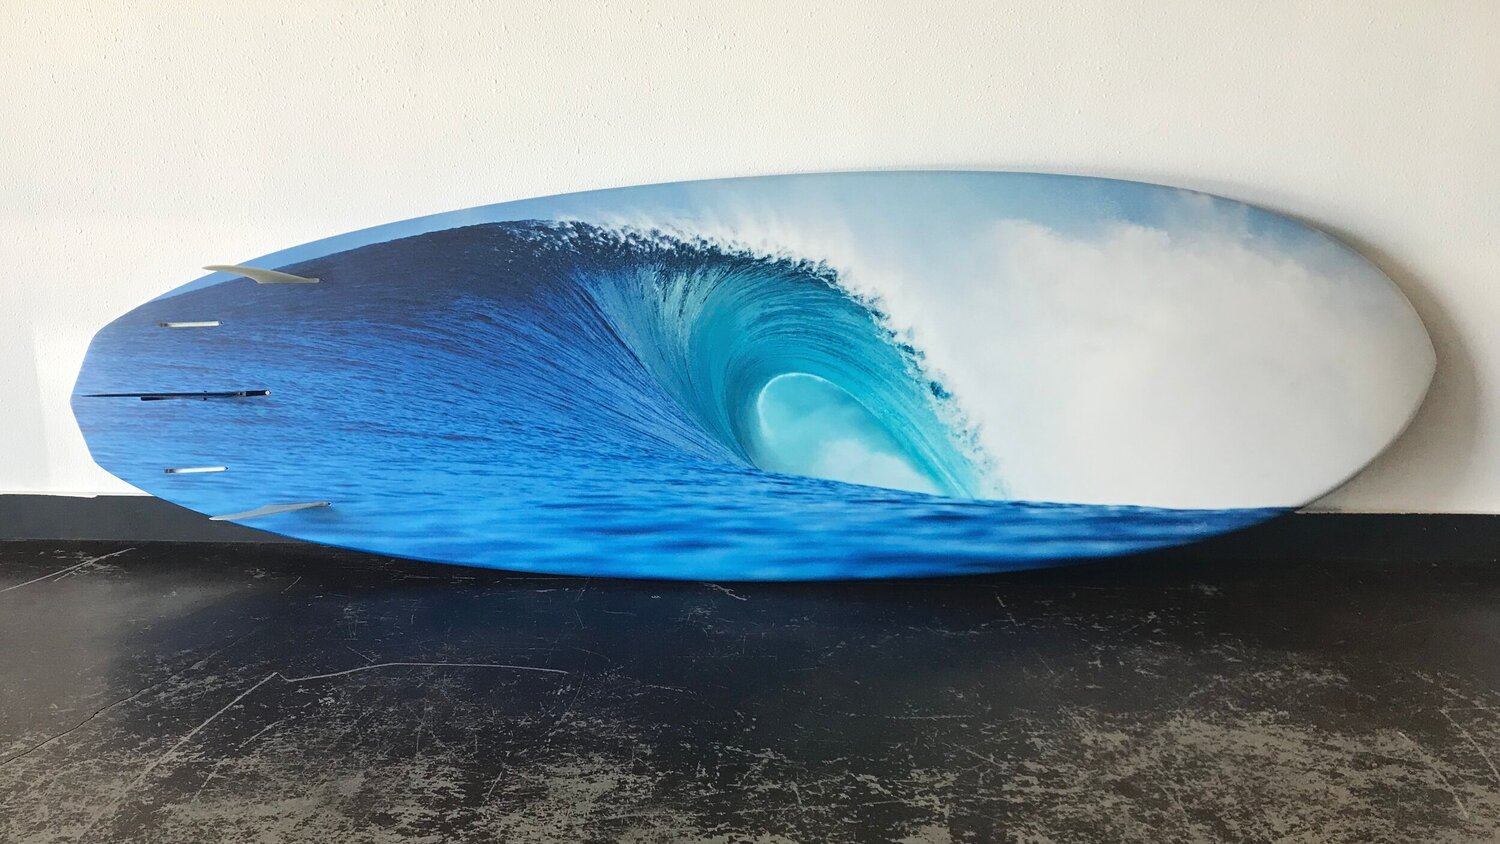 Print applied to Surfboard - email info@bobridges.com to find pricing and size